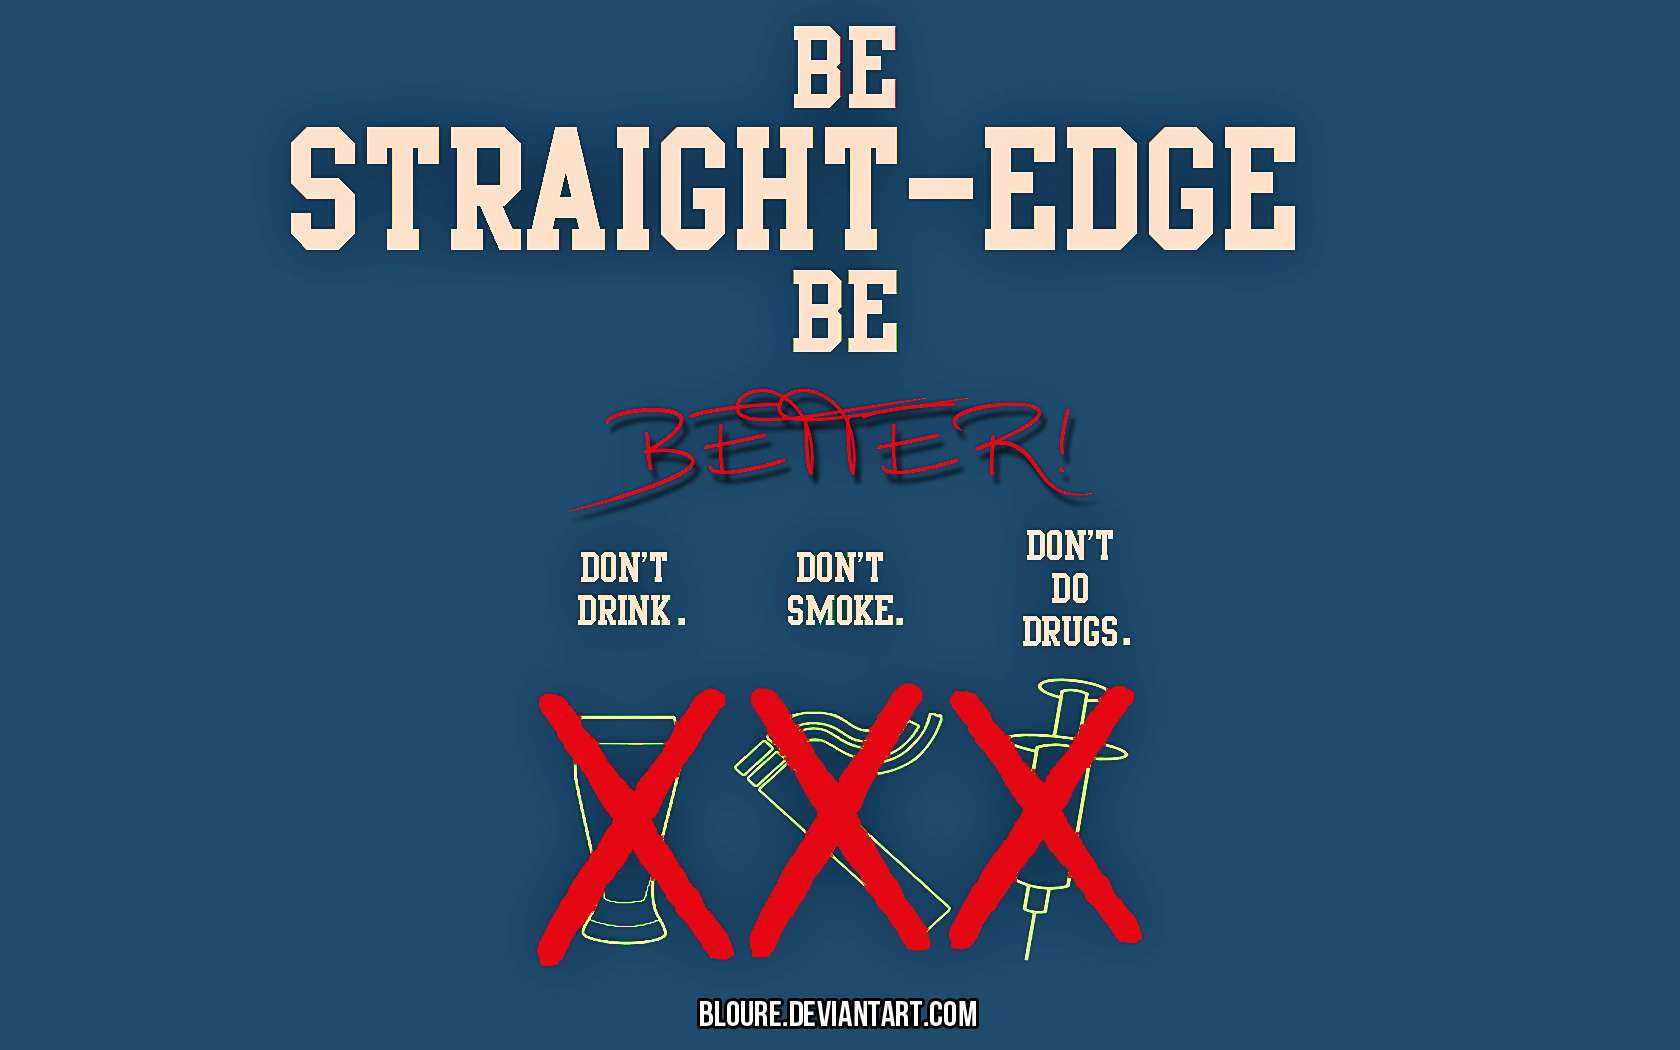 Straight edge wallpaper by bloure on